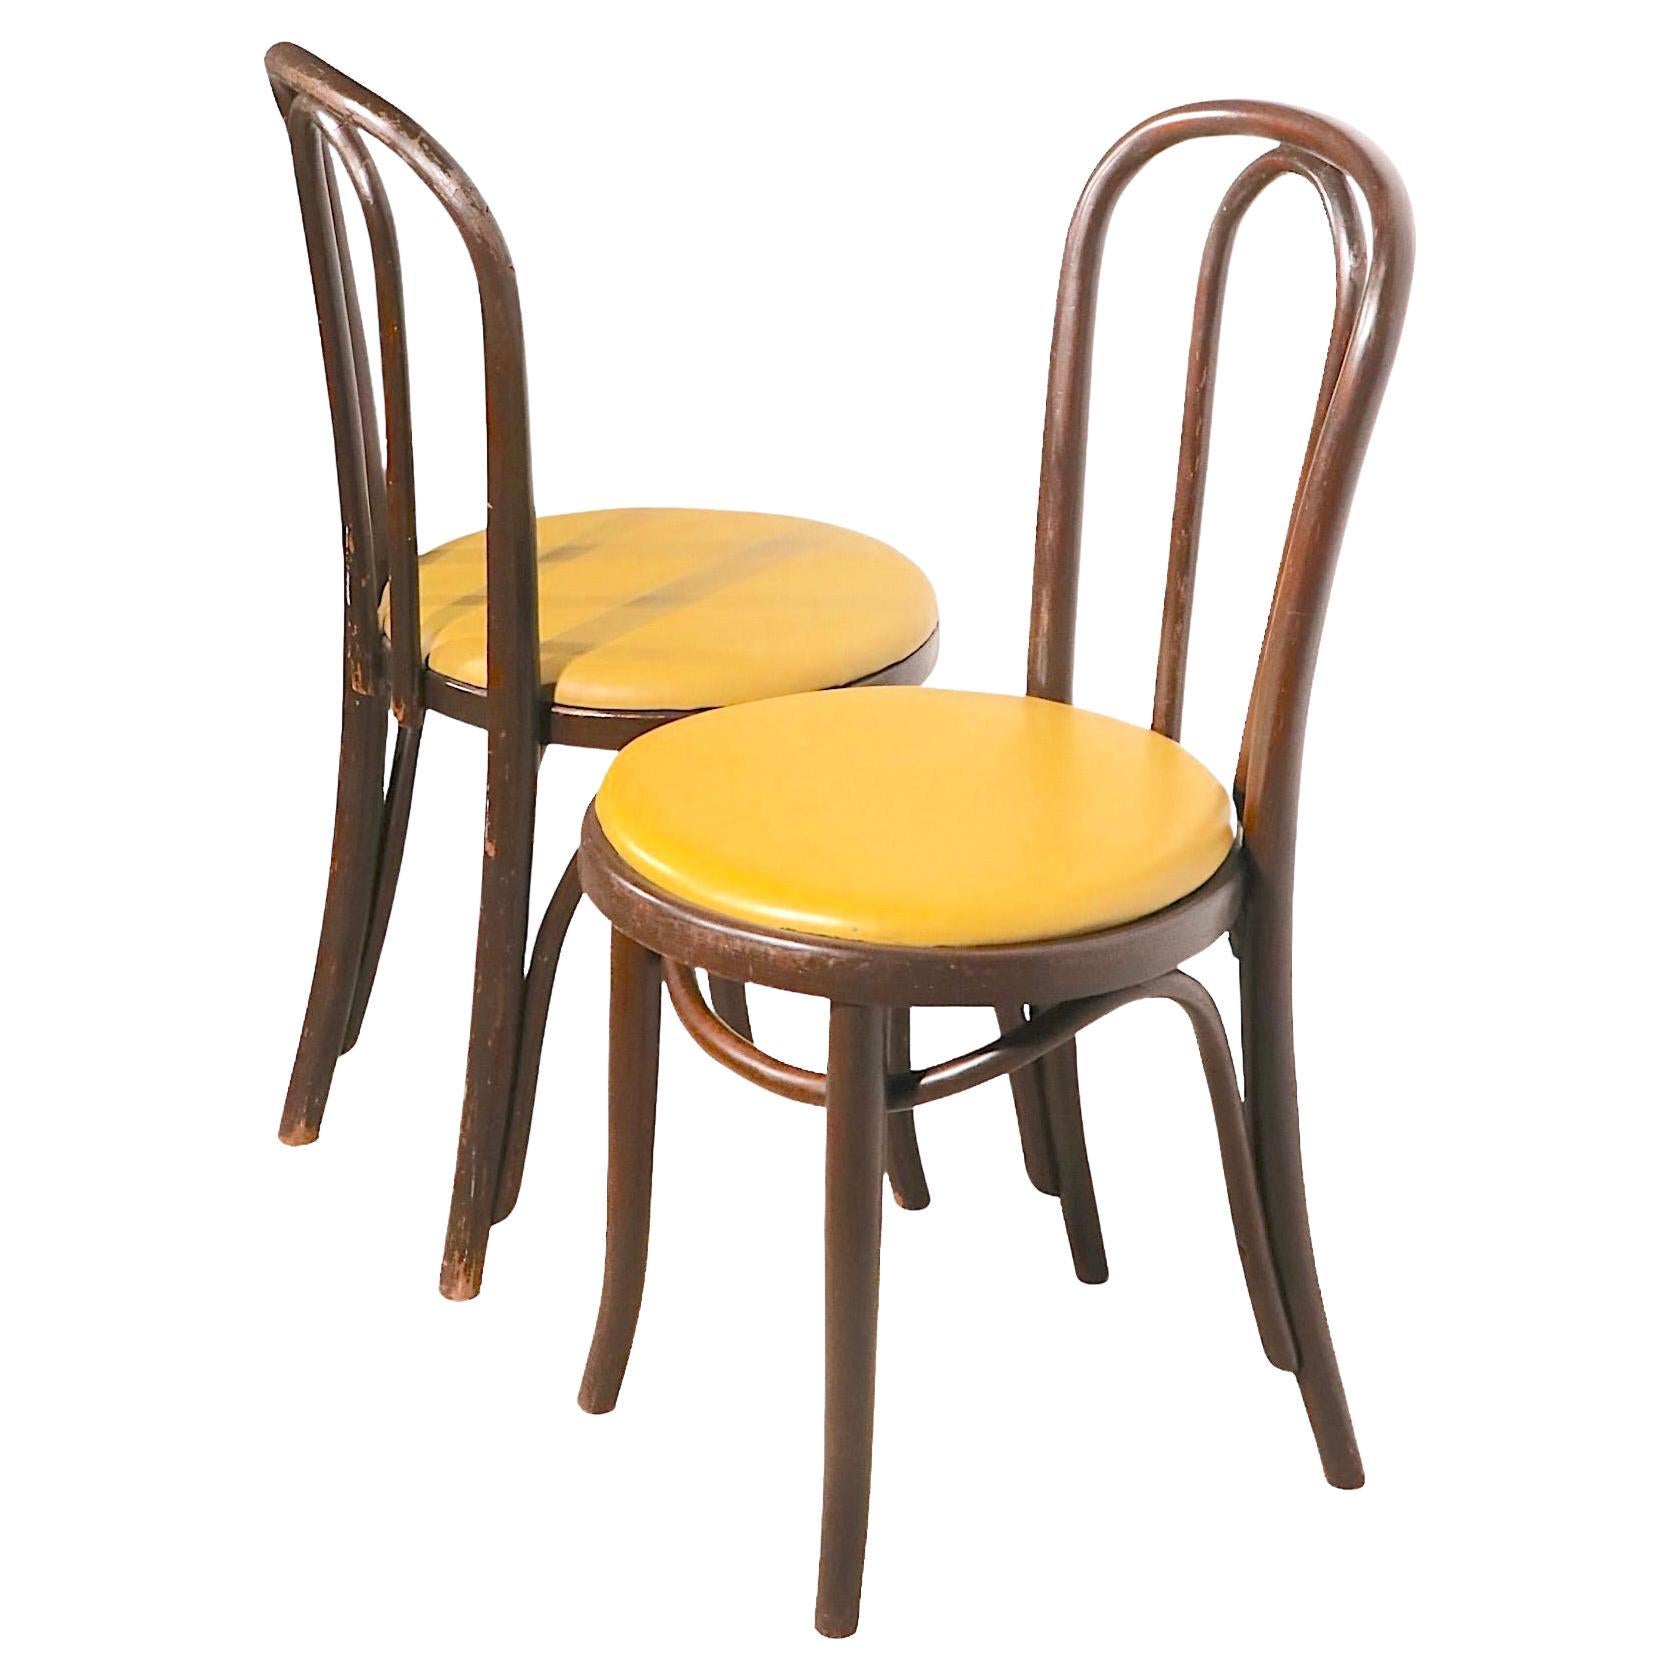 Pr. Bent Wood Bistro, Cafe Style Dining Chairs Att. to Thonet